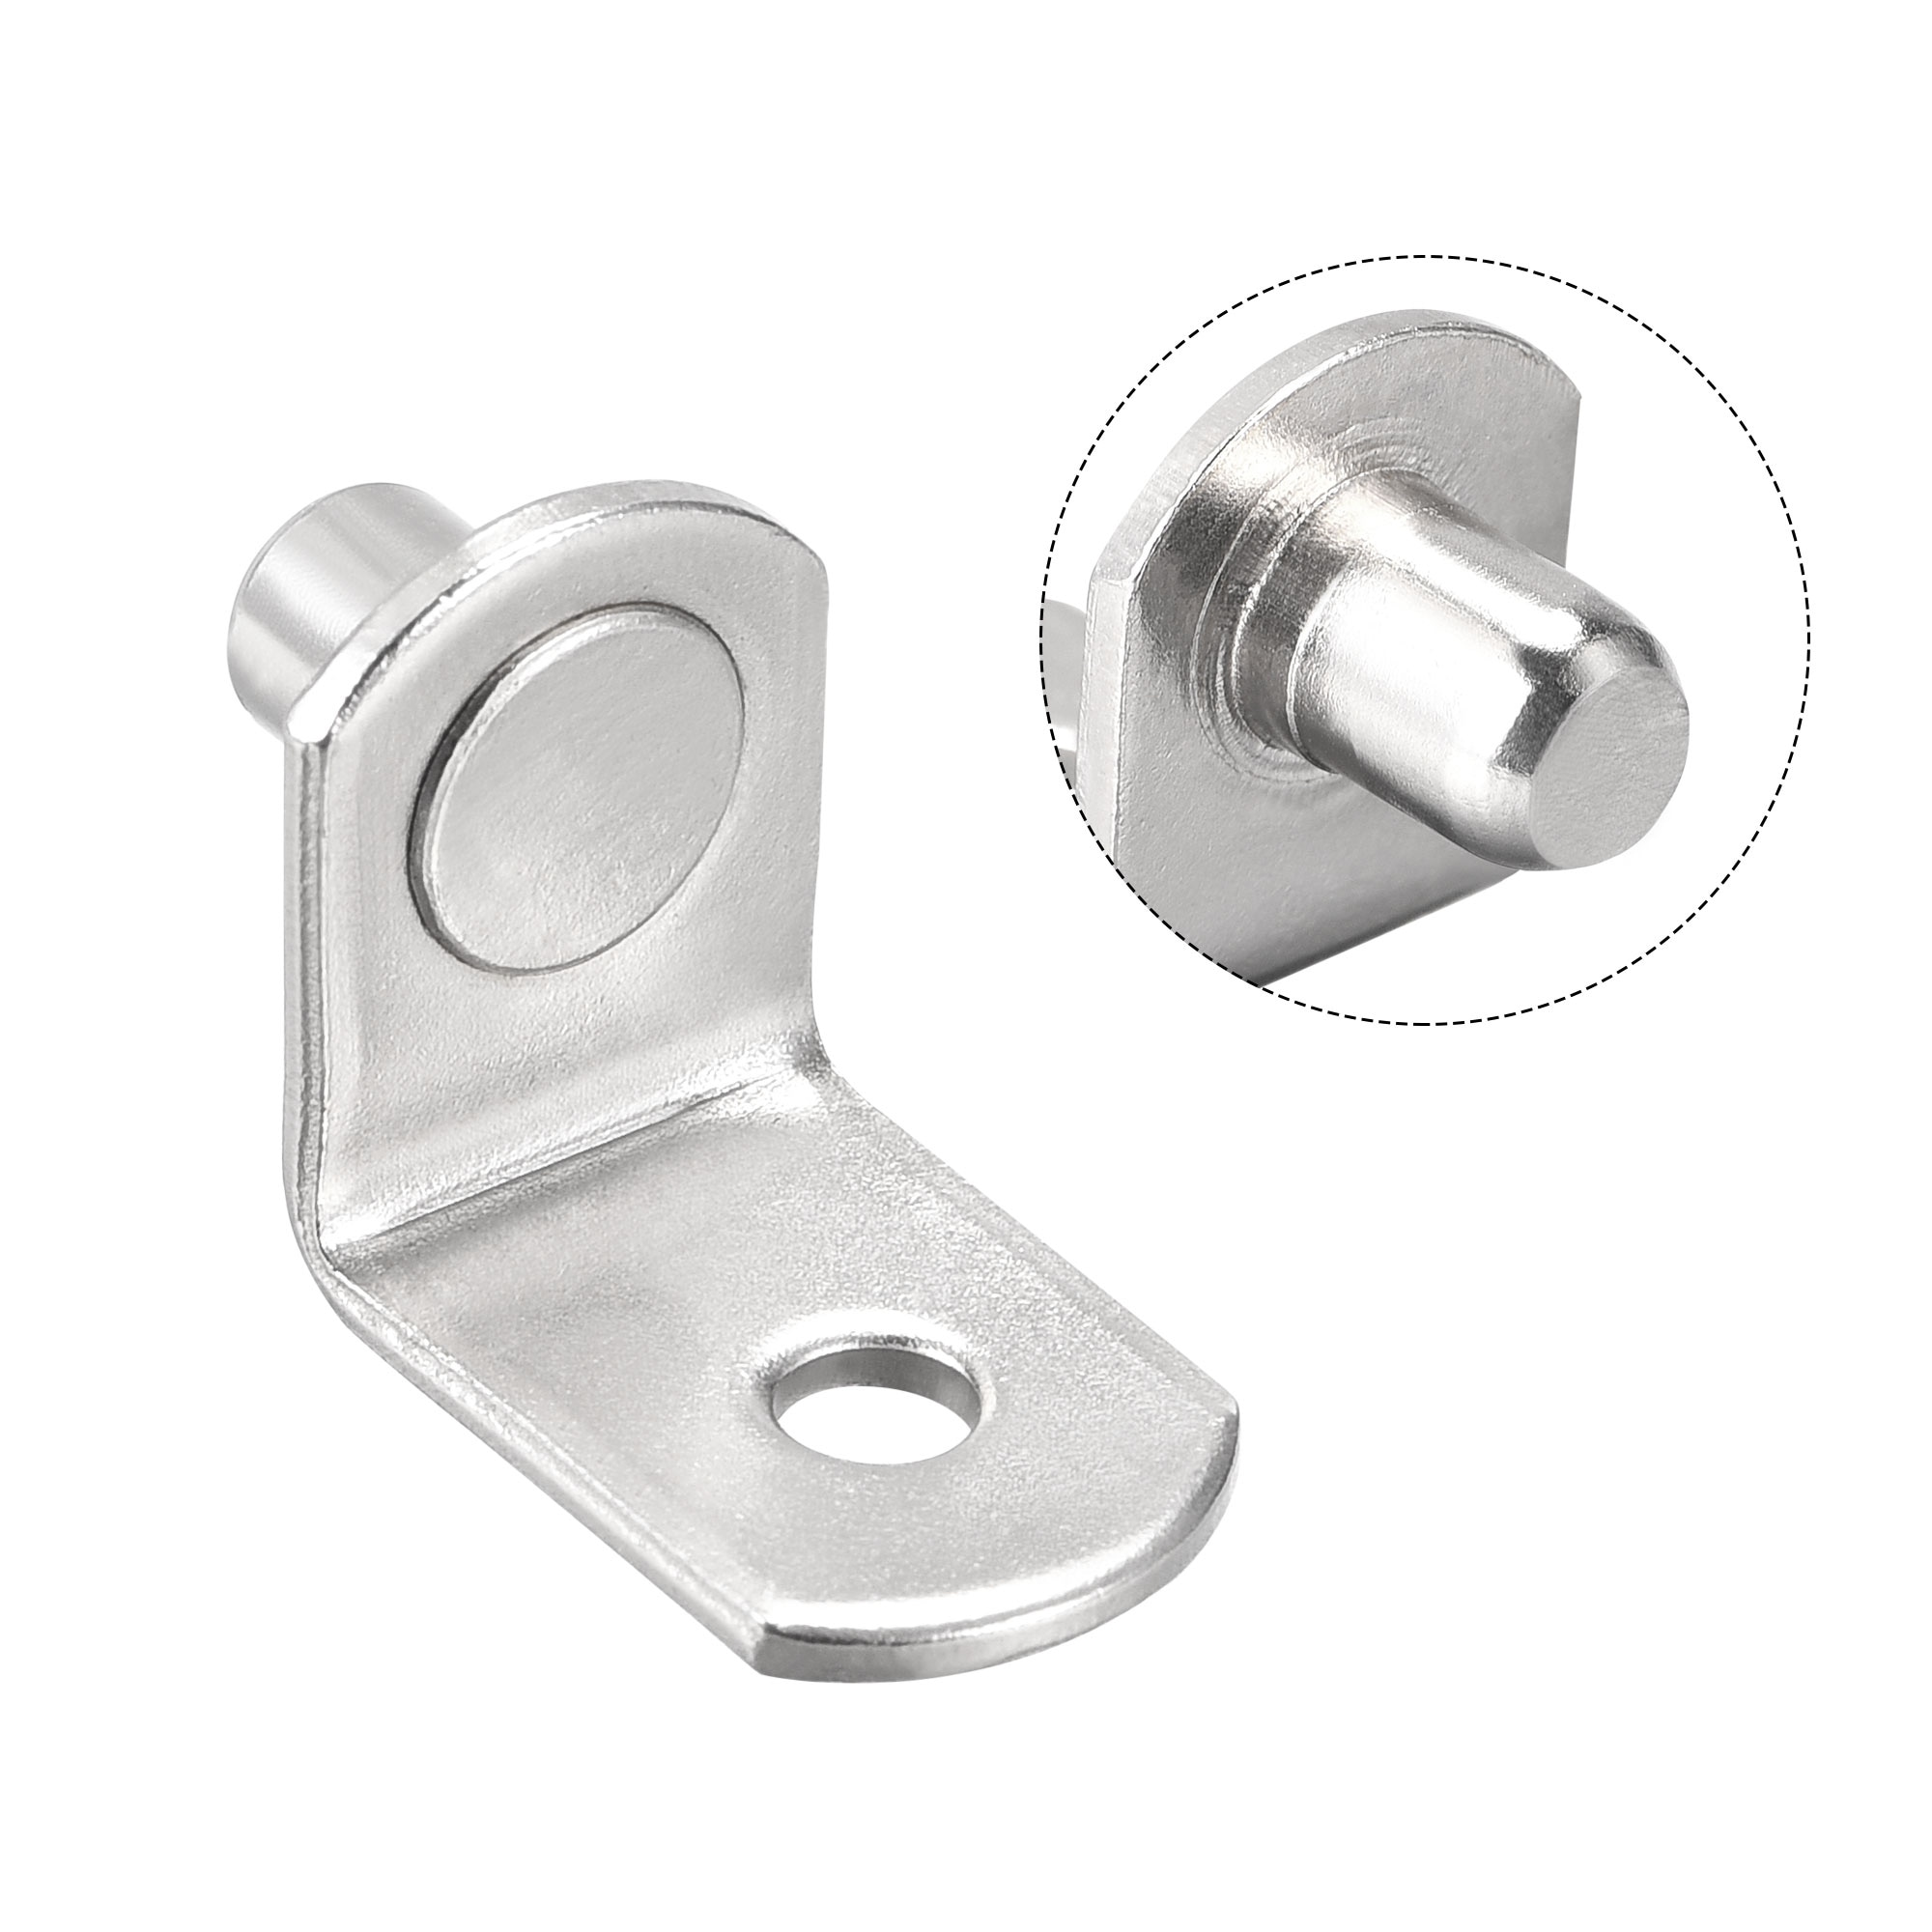 Shelf Support Peg 3 Styles 5mm 6mm 7mm Pin with Hole Silver Tone 60pcs -  Silver Tone - Bed Bath & Beyond - 33874979